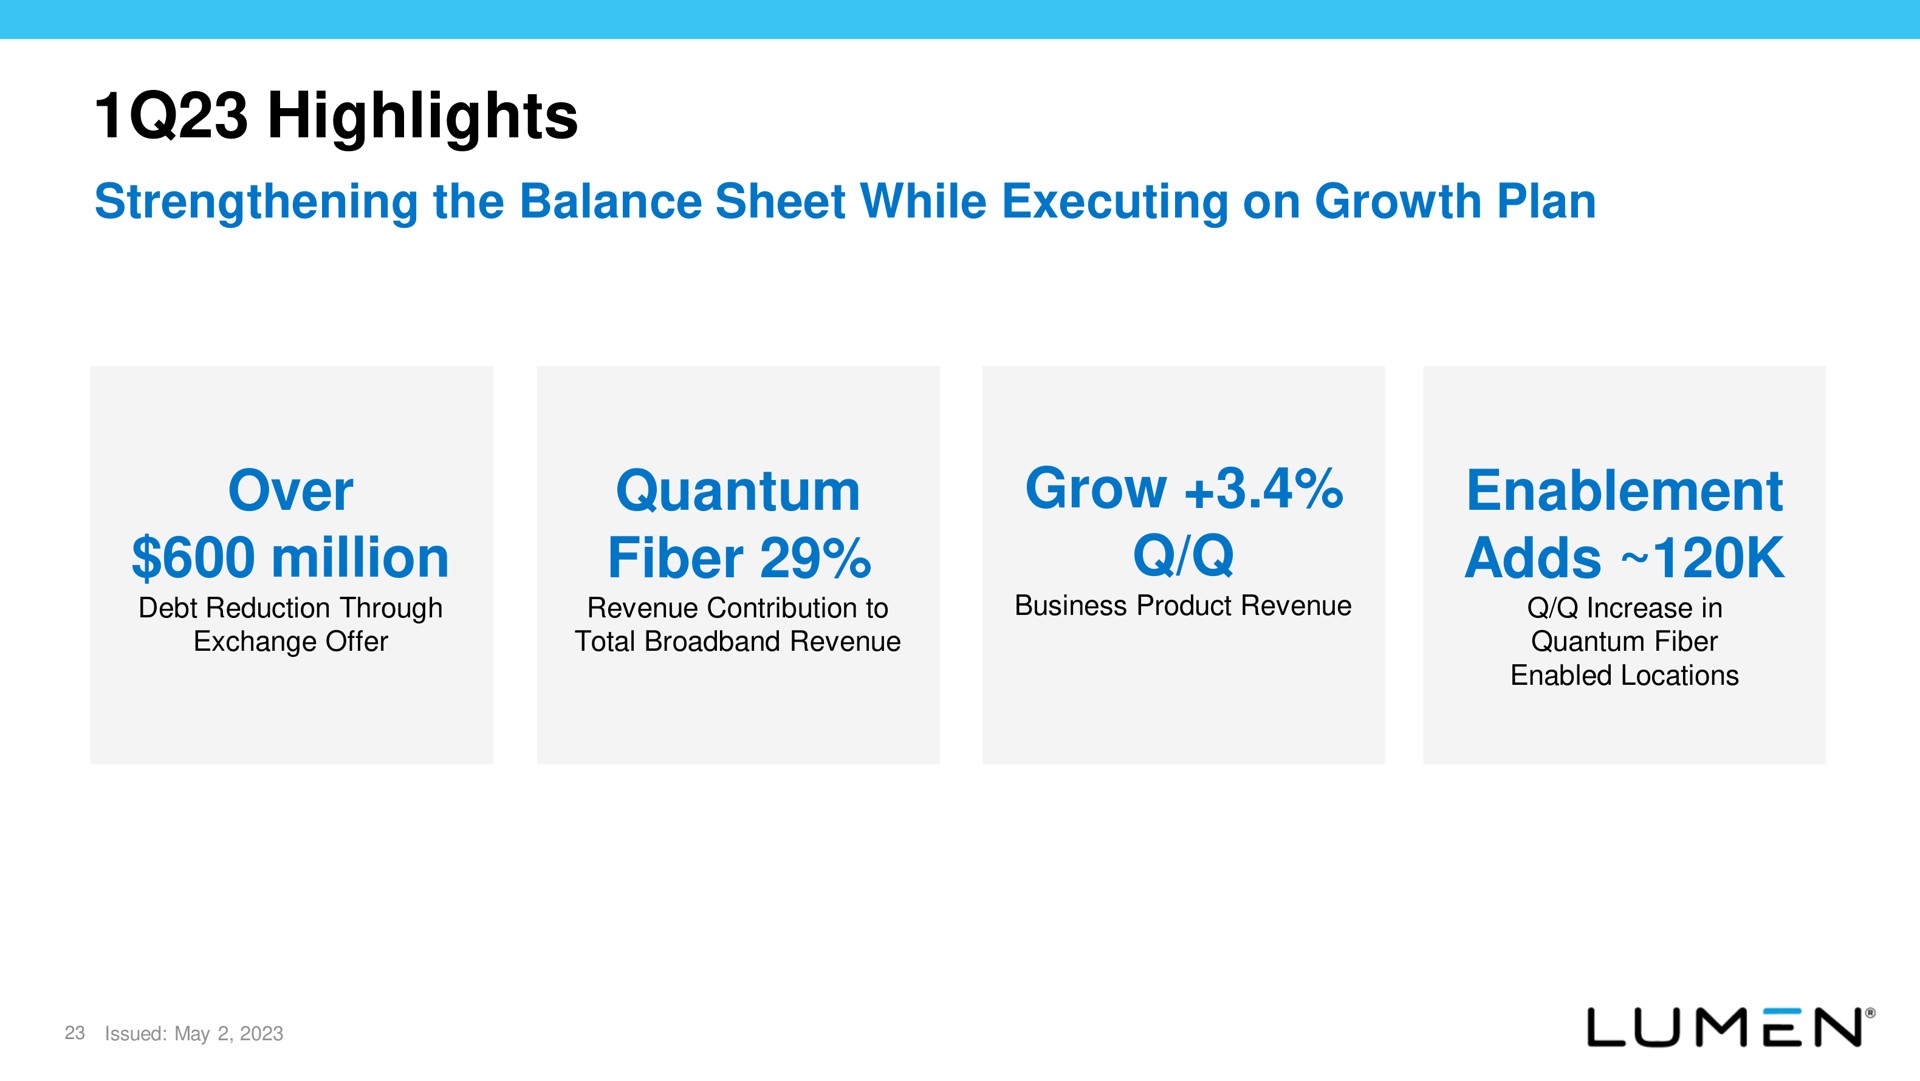 highlights strengthening the balance sheet while executing on growth plan over million quantum fiber grow enablement adds | Lumen